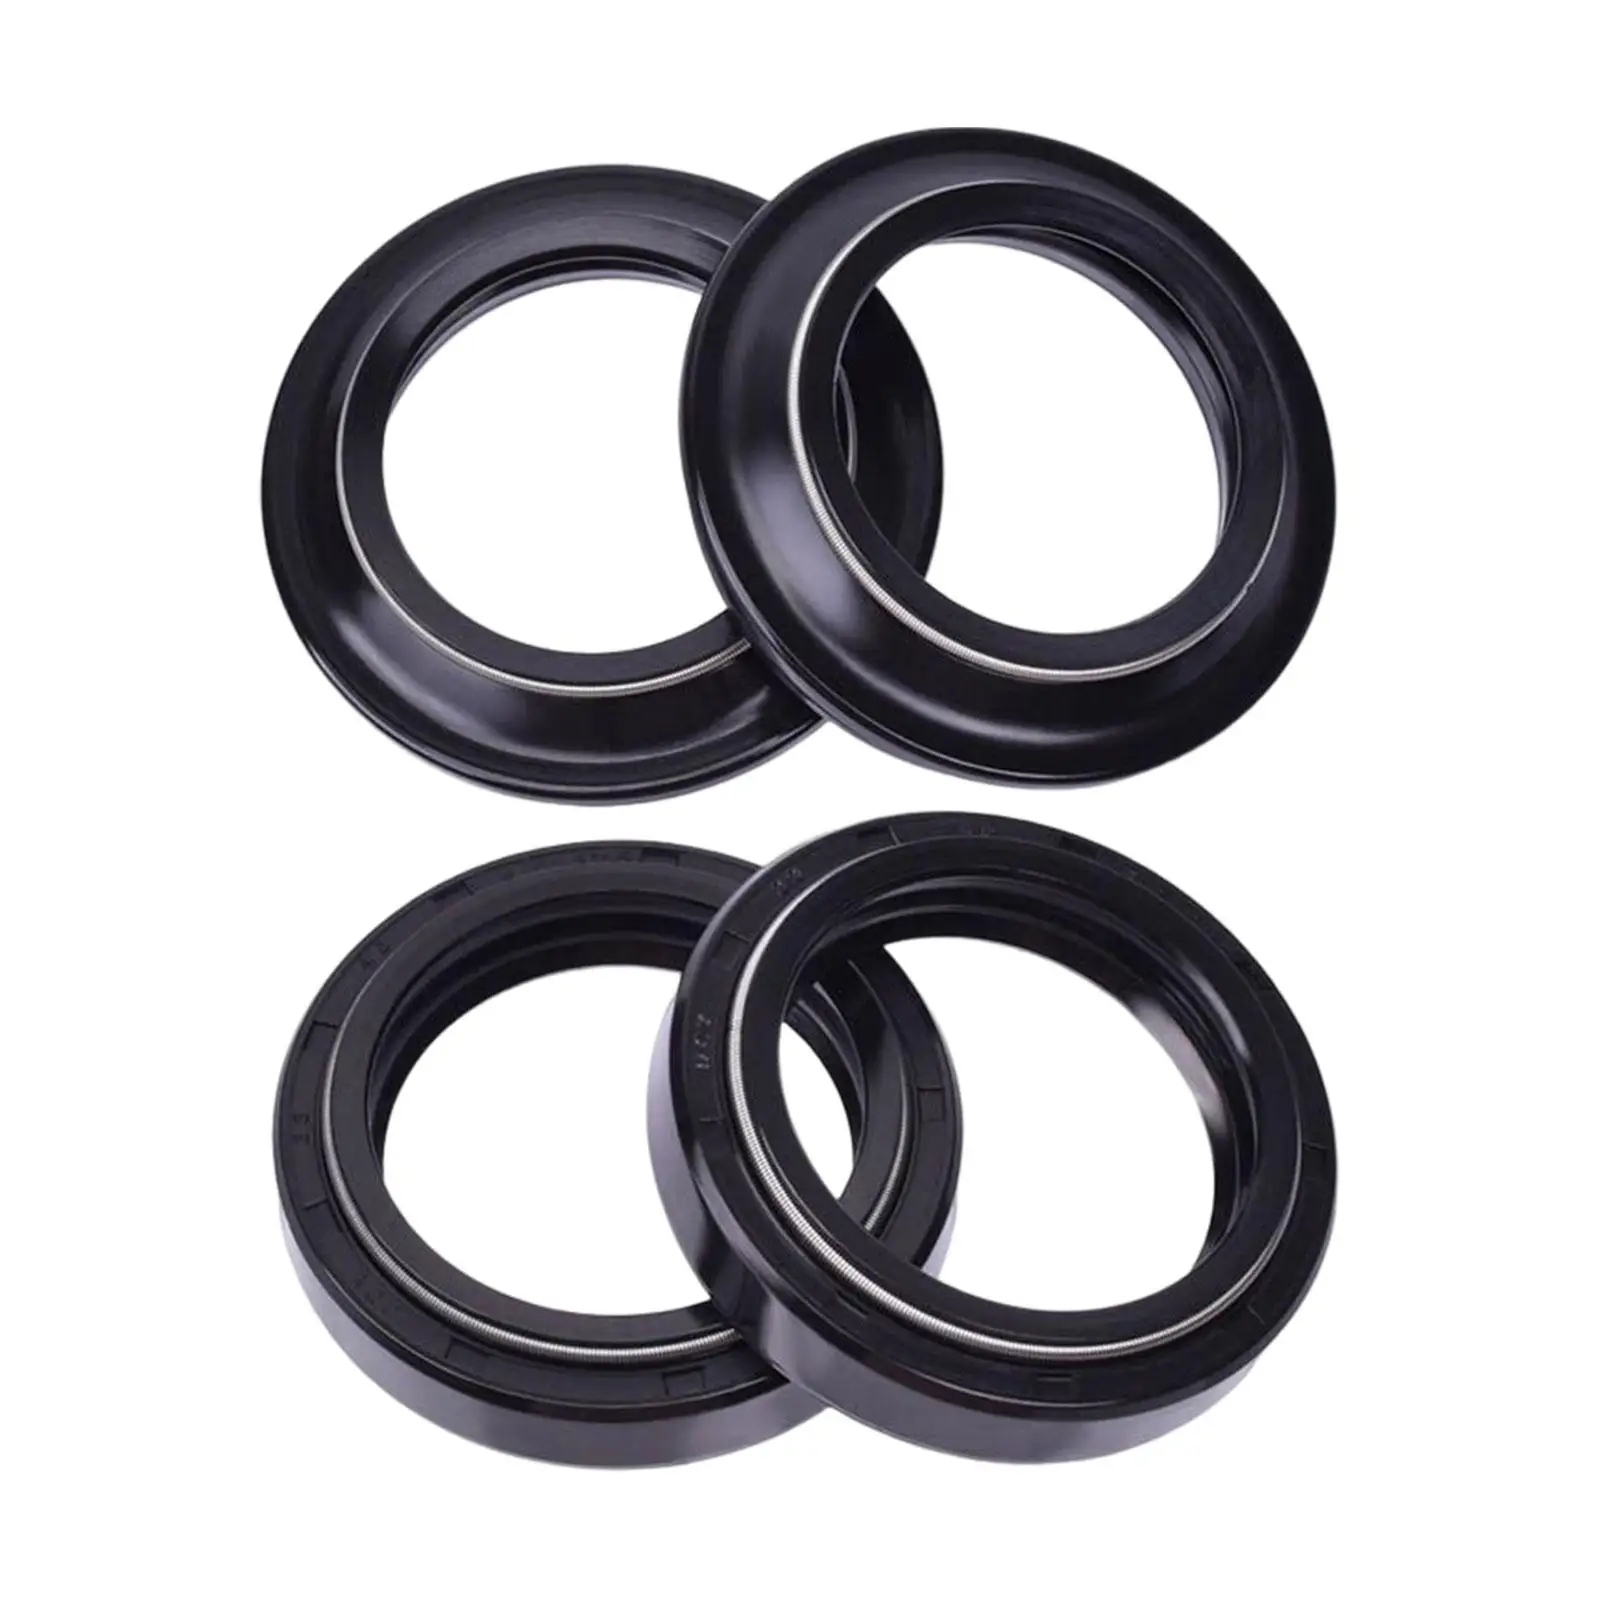 4 Pieces Motorcycle Front Fork Damper Shock Oil Seal & Dust Seal Parts for Yamaha TW200 XV125 Virago Yzf-r125 Yzf-r15 150cc images - 6